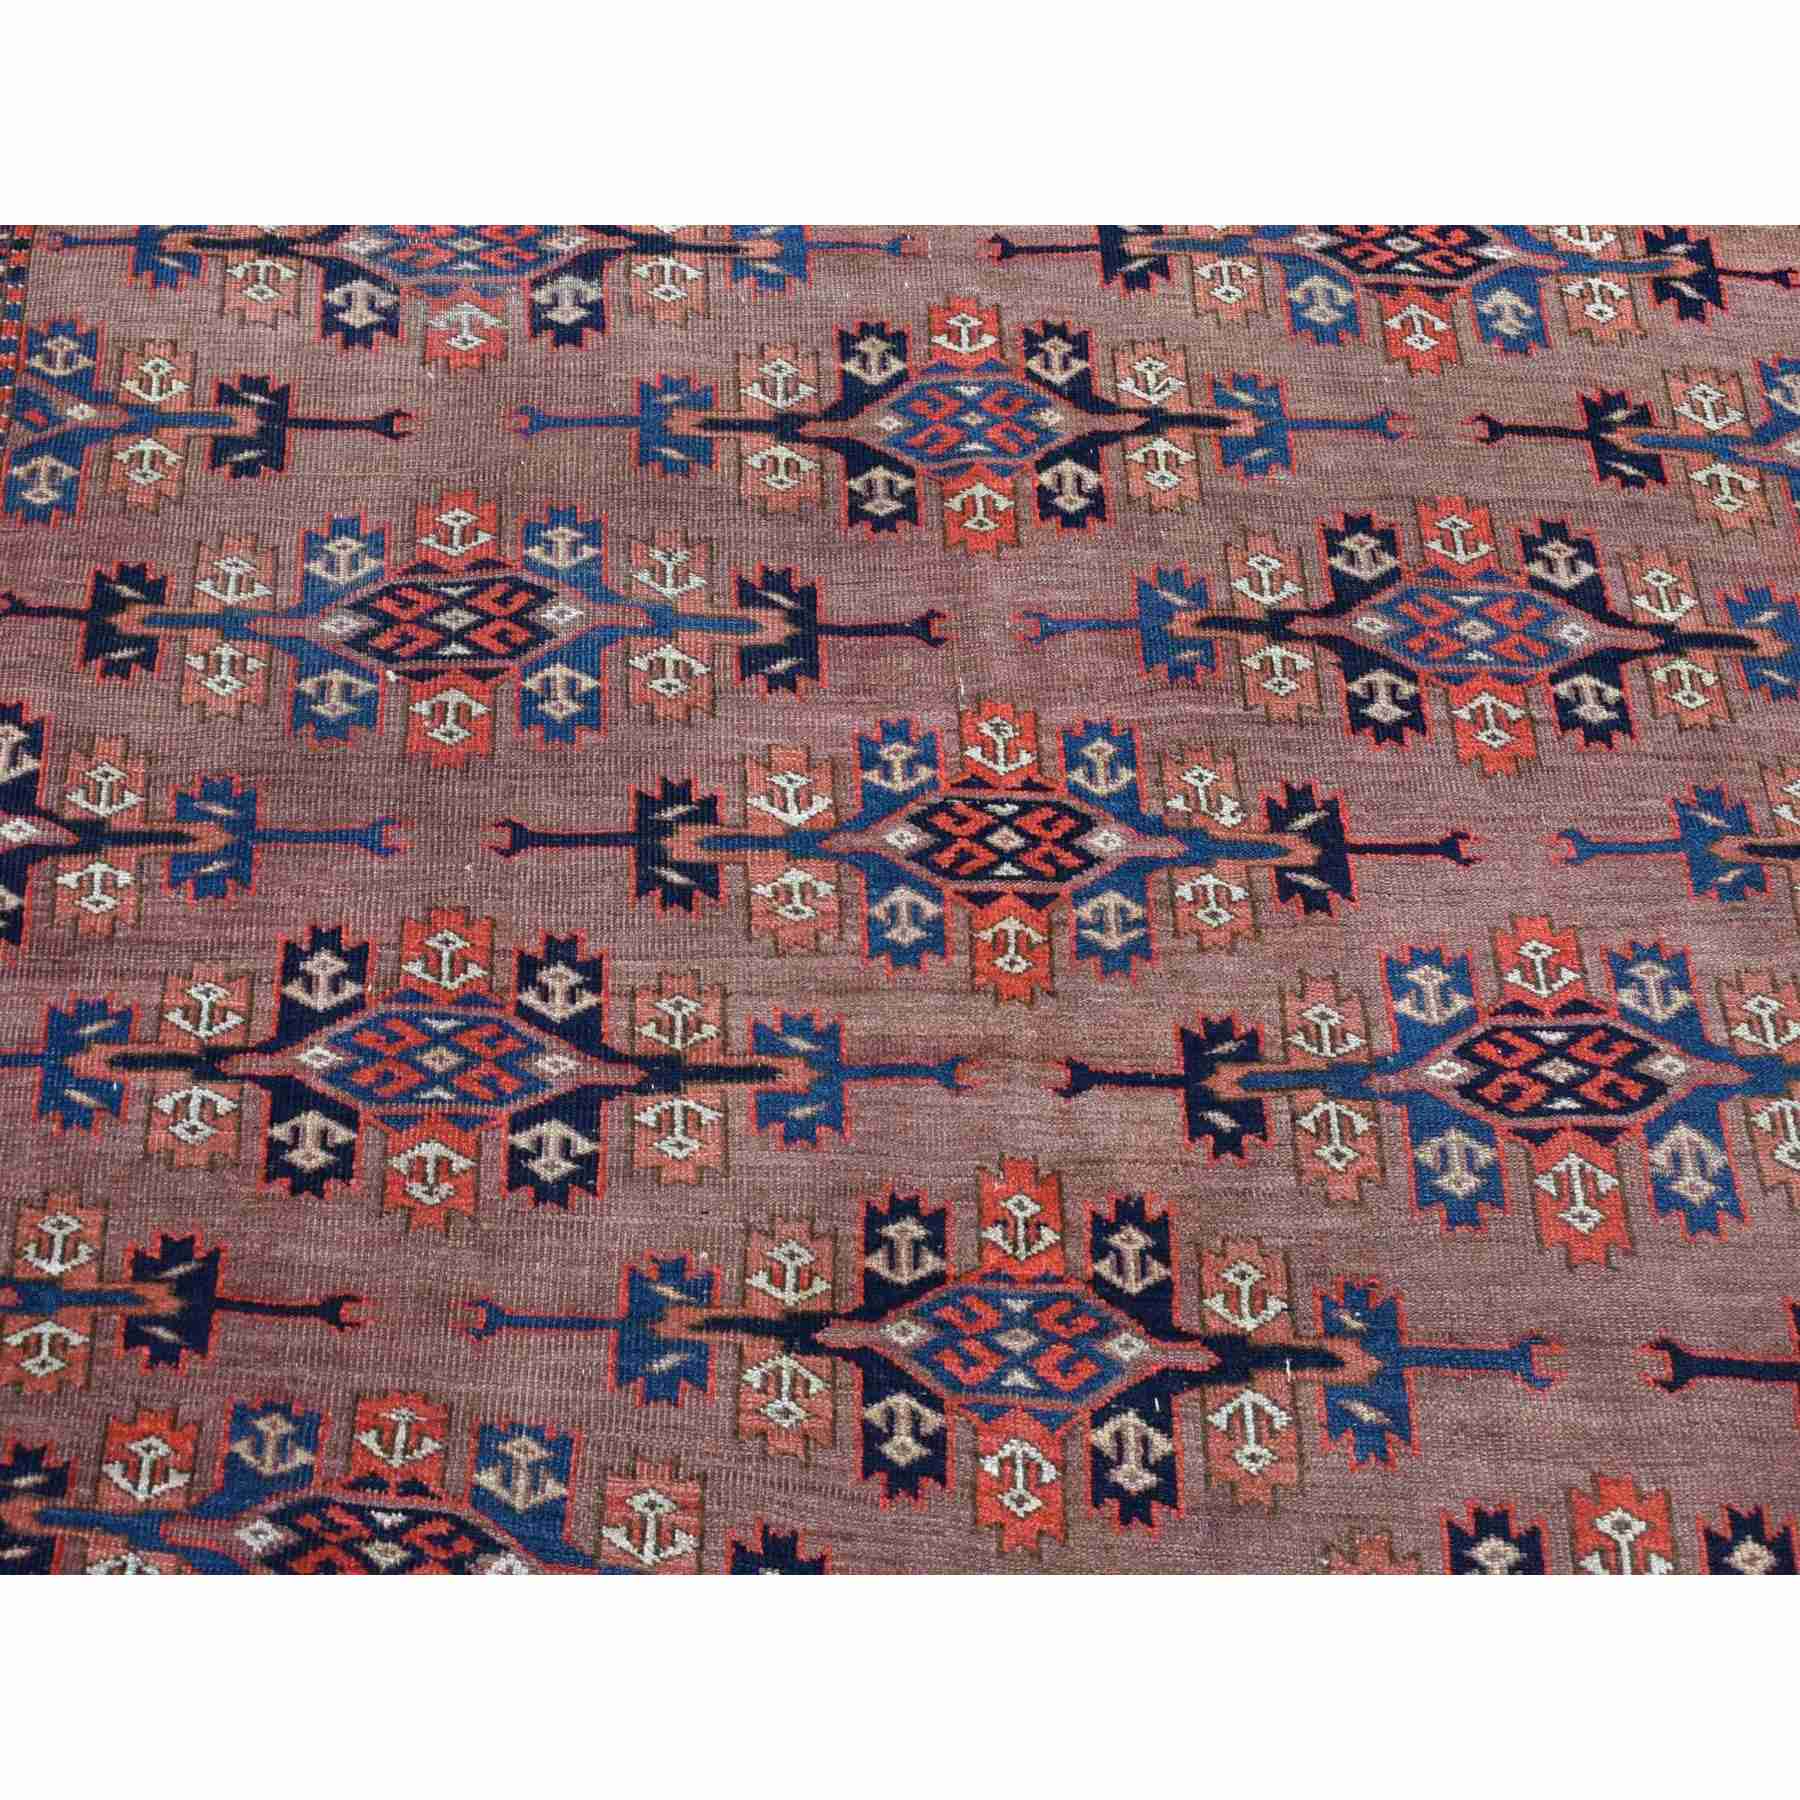 Antique-Hand-Knotted-Rug-401685